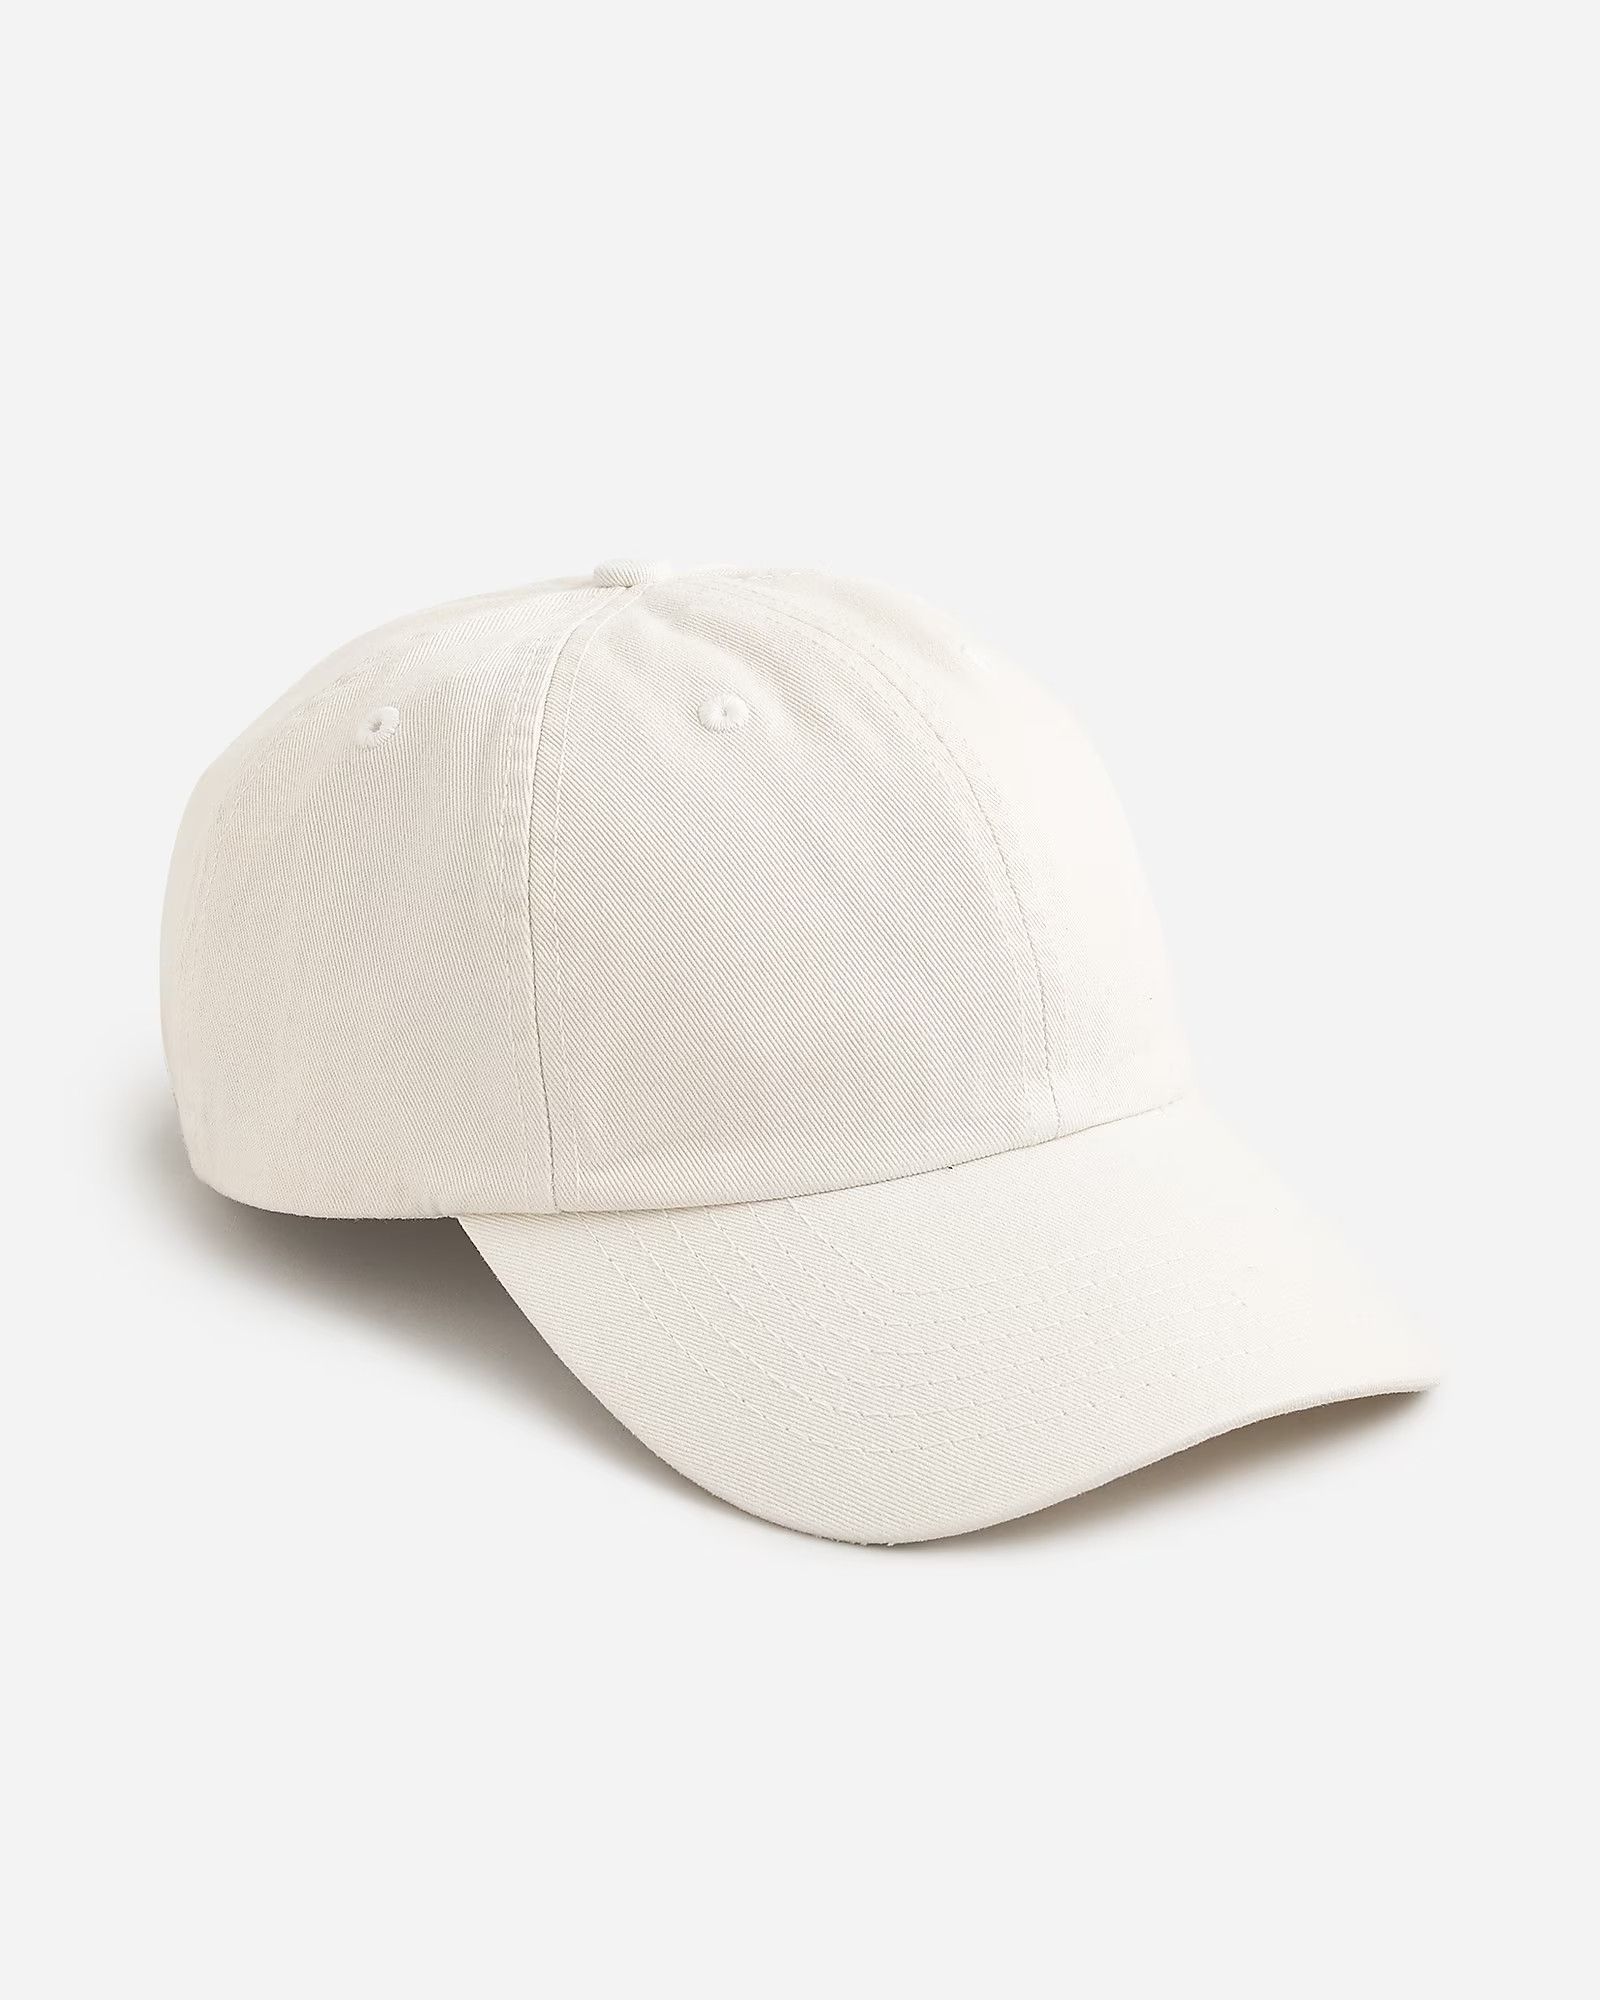 Made-in-the-USA garment-dyed twill baseball cap | J.Crew US